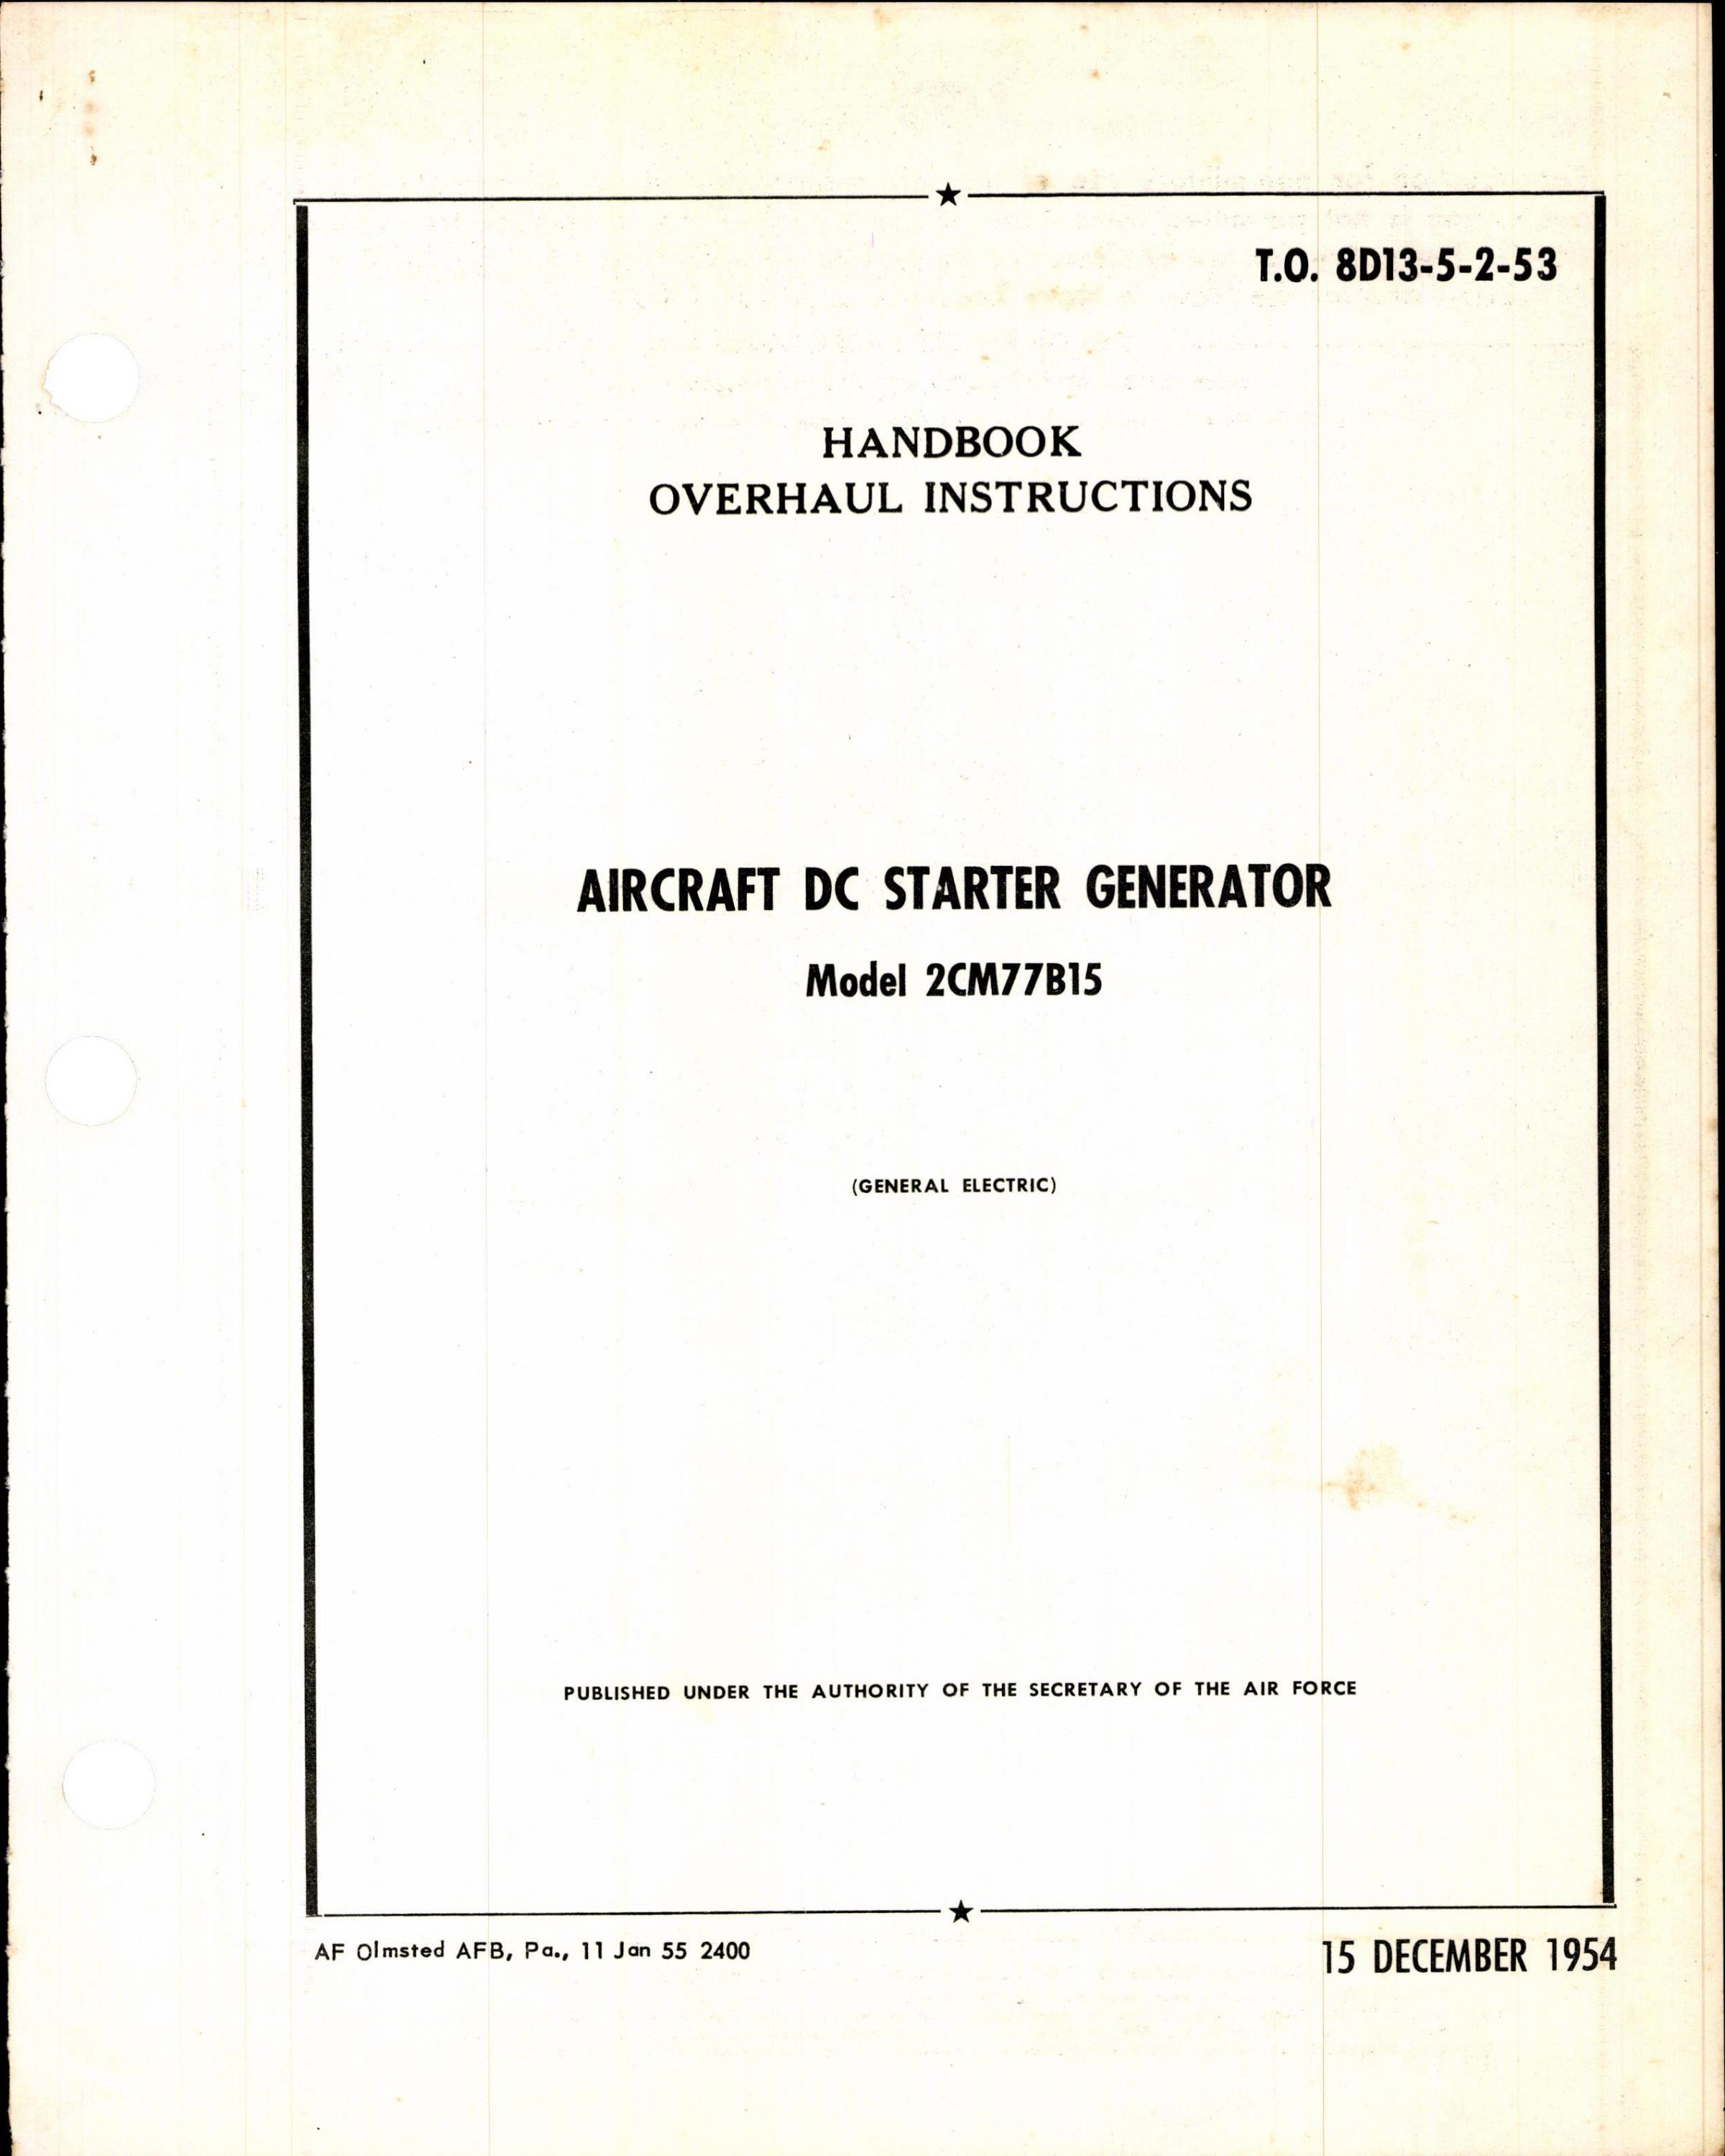 Sample page 1 from AirCorps Library document: Instructions for Aircraft DC Starter Generator, 2CM77B15